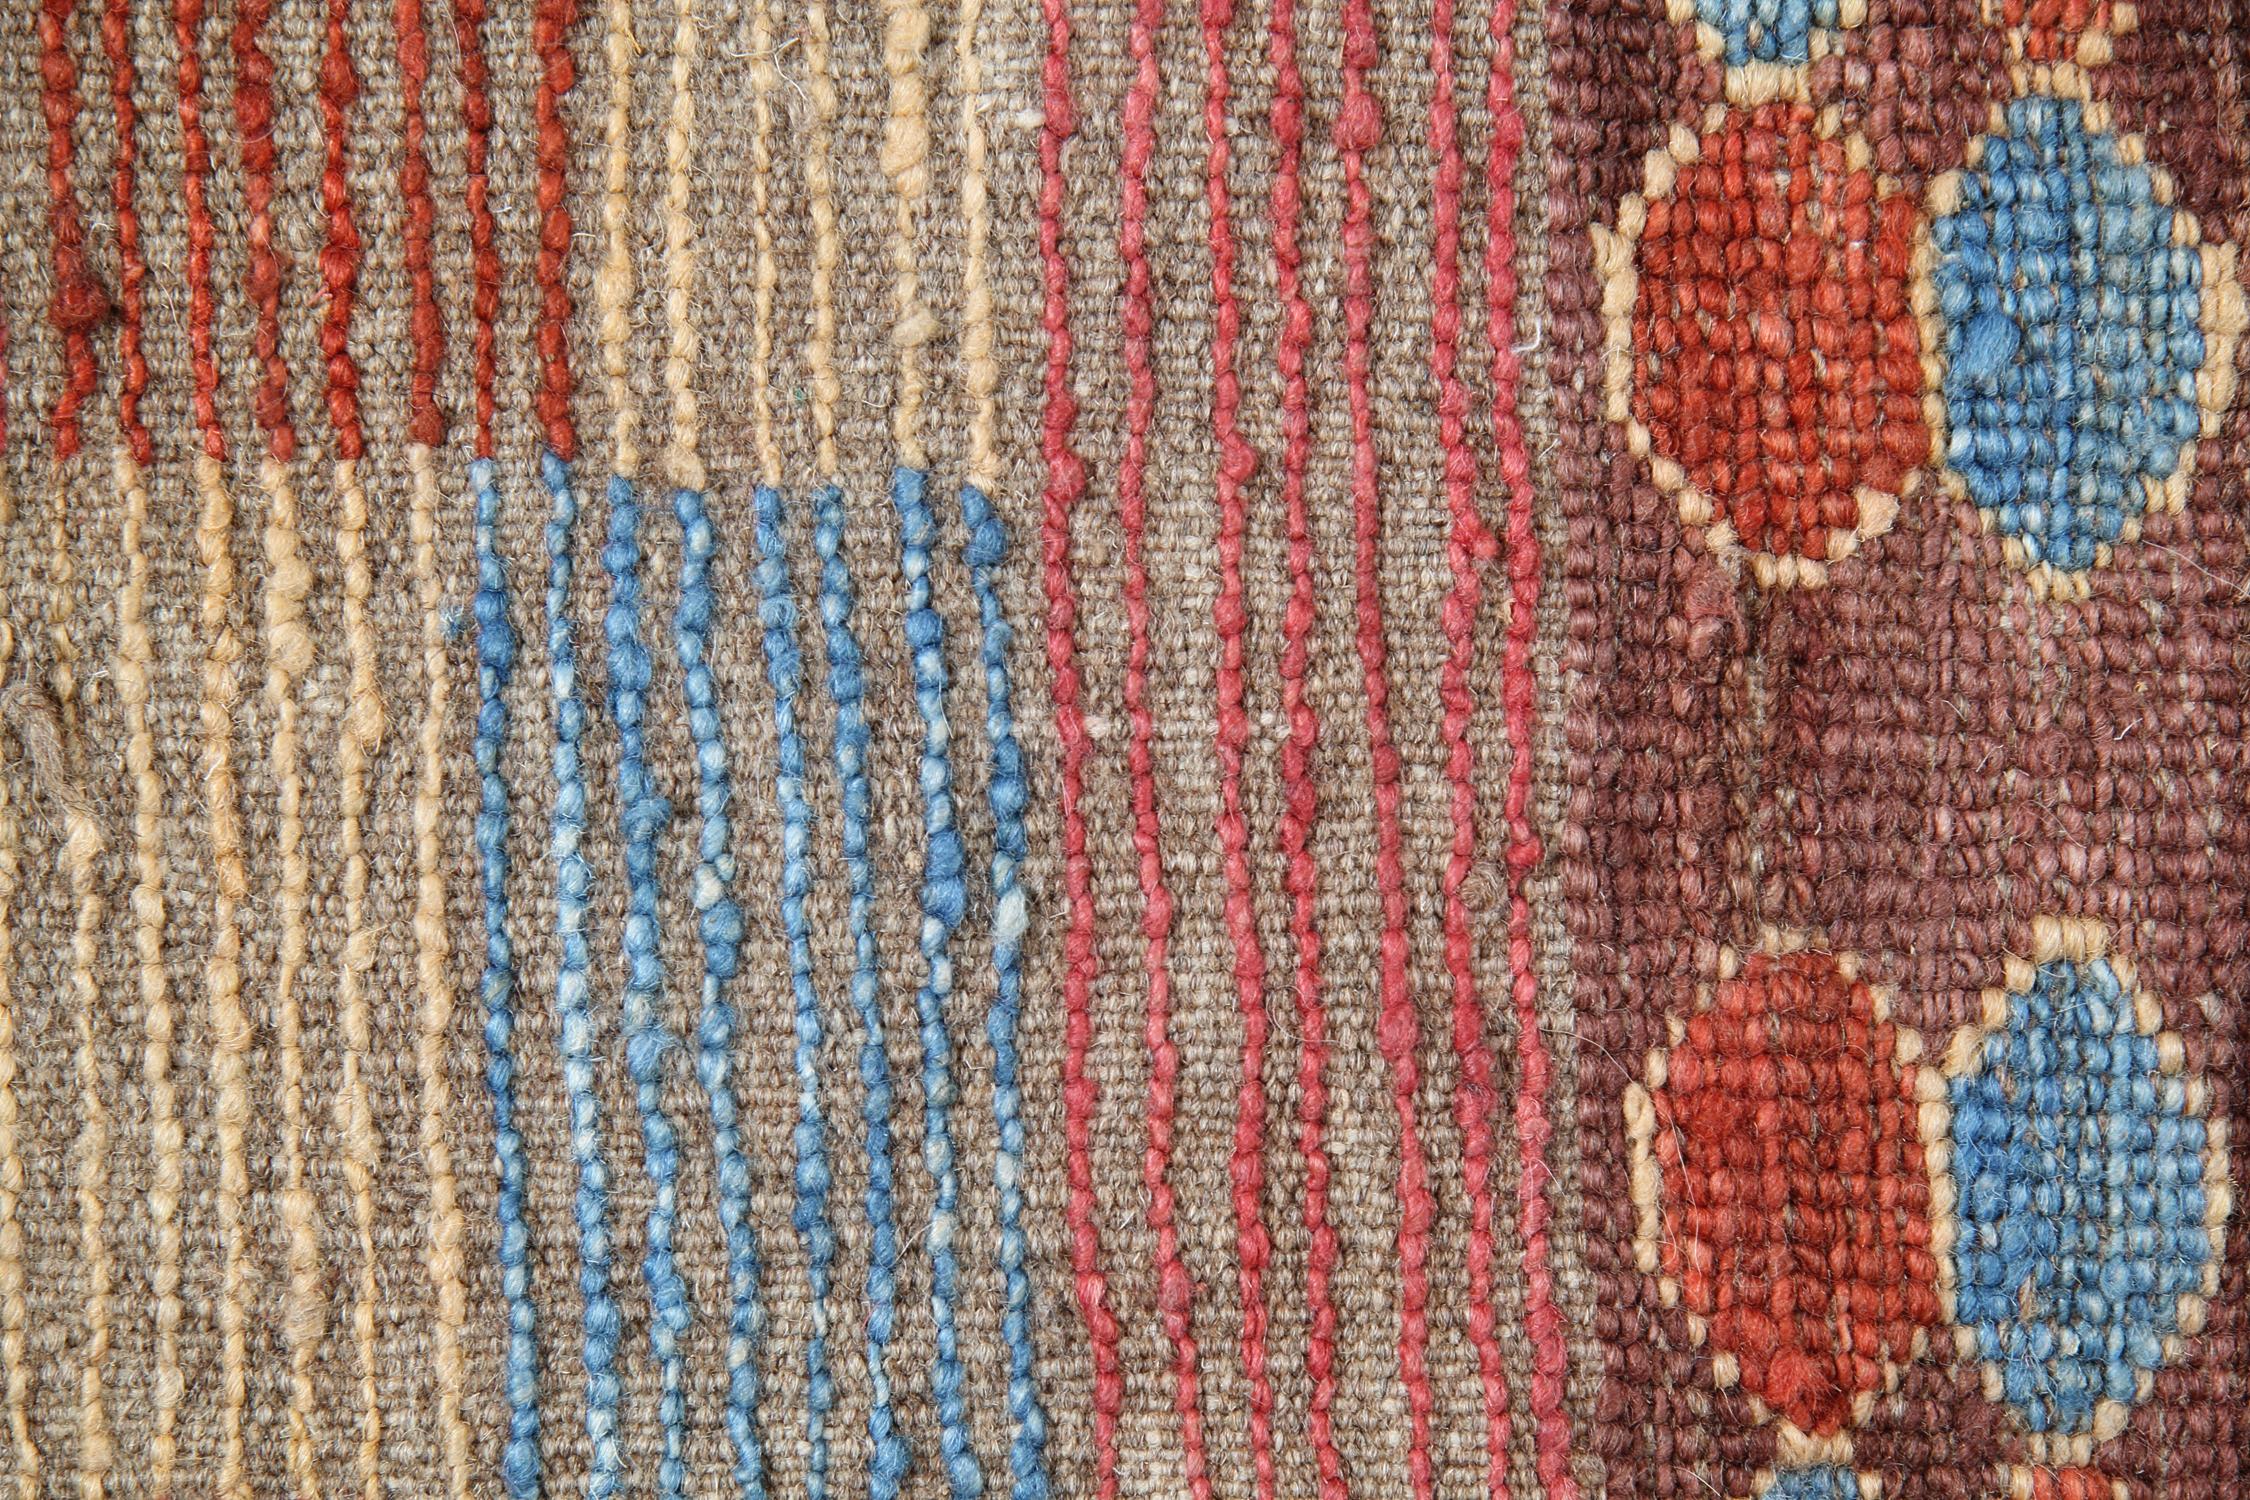 Tribal Handmade Carpet Moroccan Rugs, Shag Rugs, Pink and Red Primitive Carpet for Sale For Sale